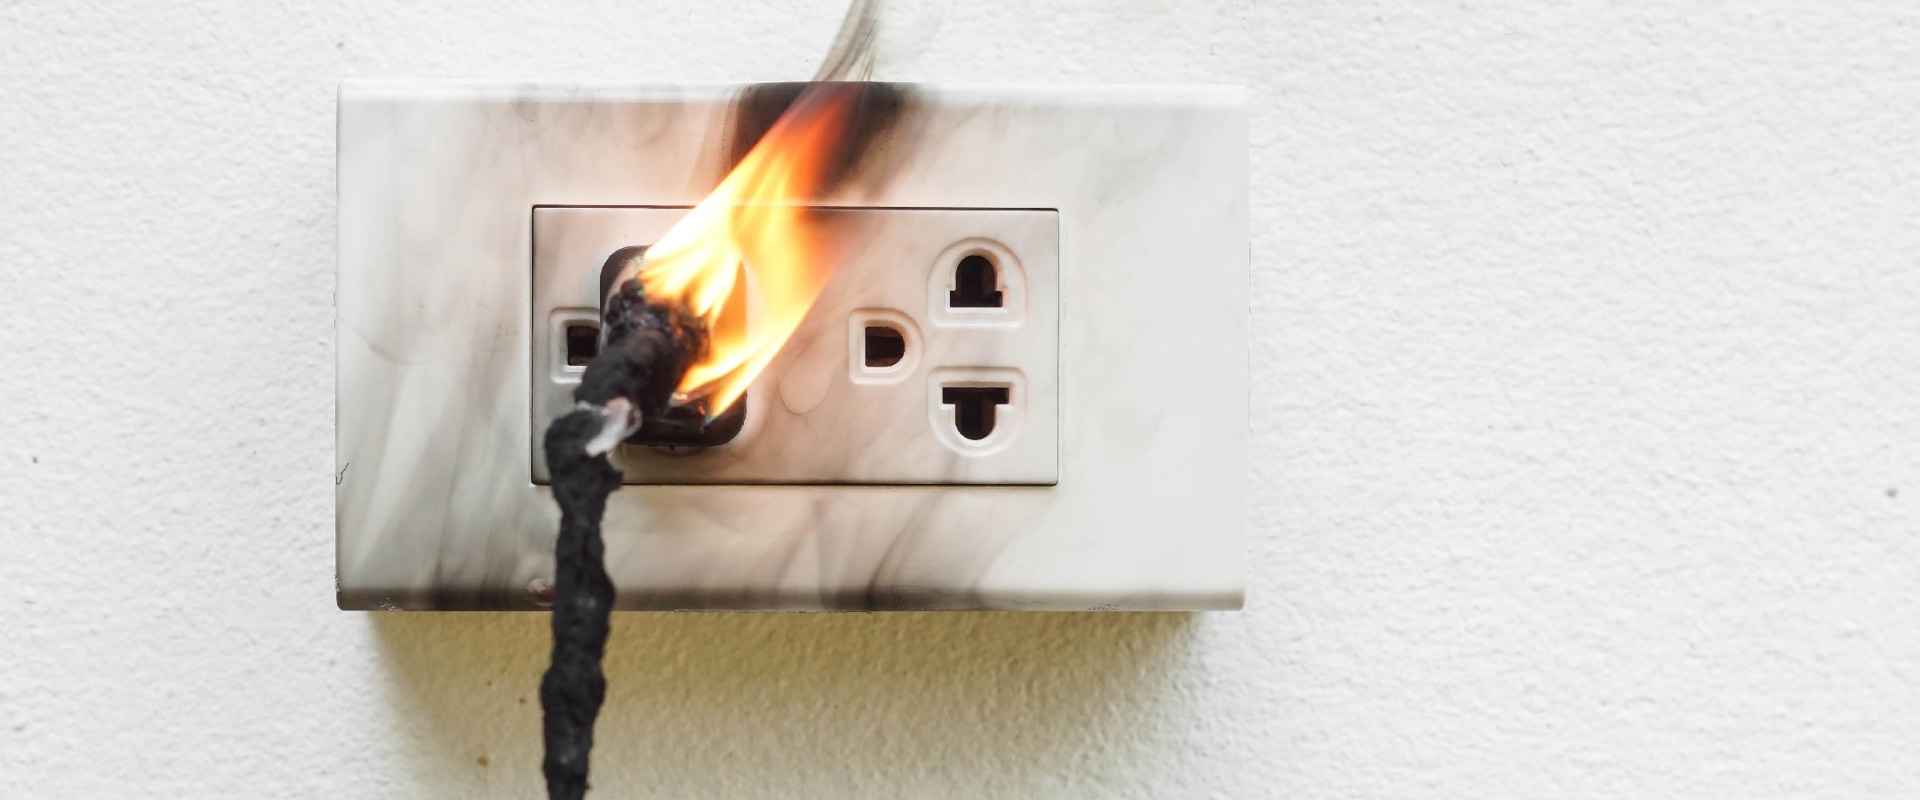 10 Common Electrical Problems and Solutions